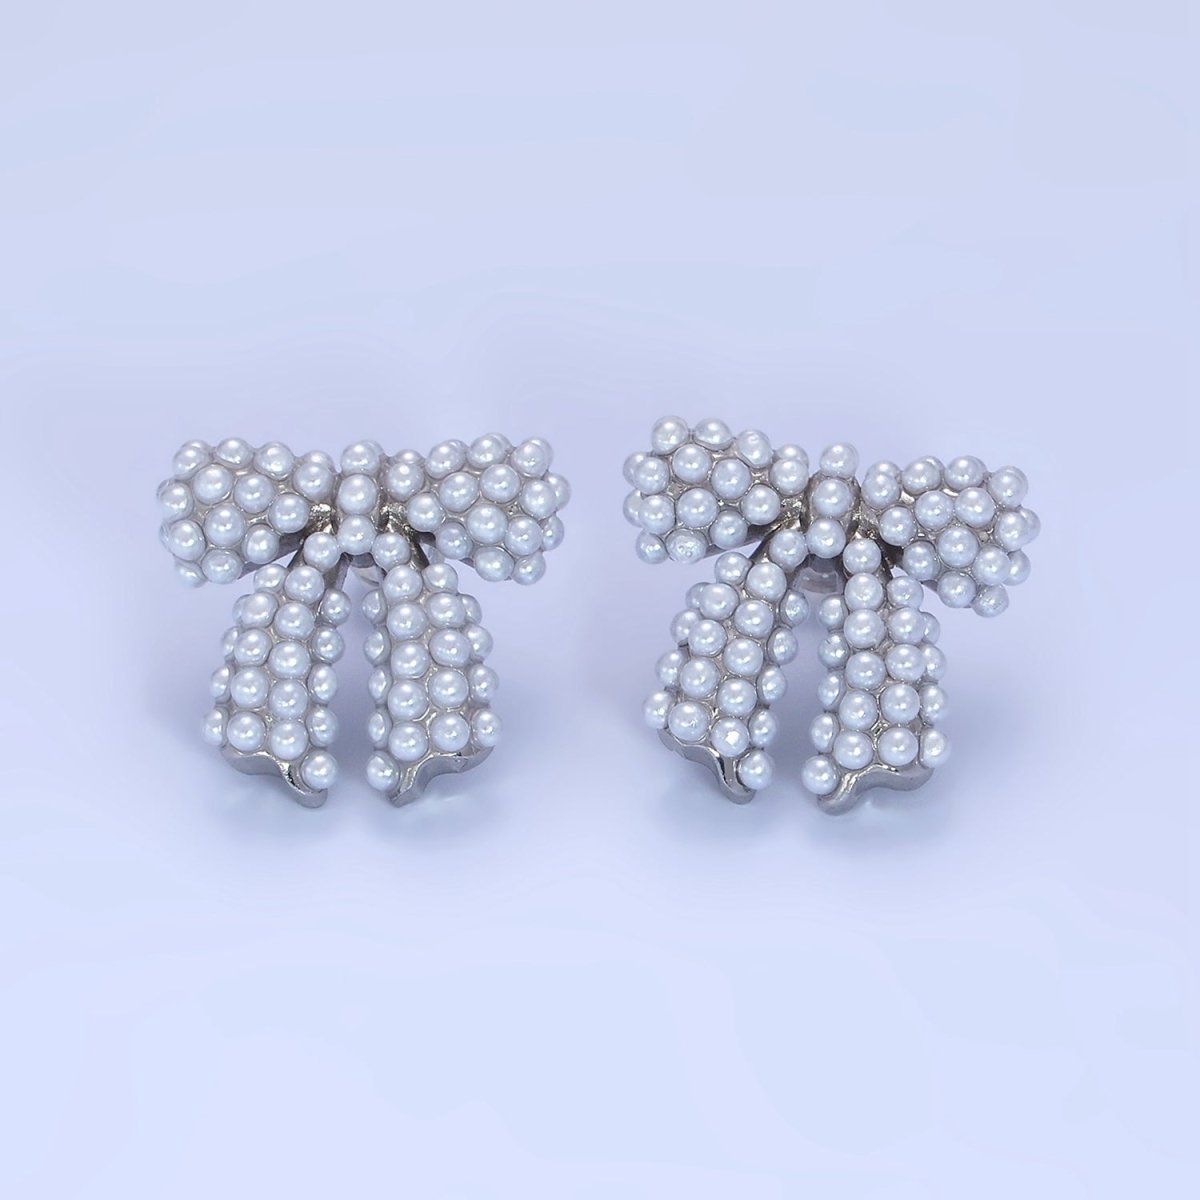 14K Gold Filled Pearl Ribbon Bow Stud Earrings in Gold & Silver | P246 P247 - DLUXCA